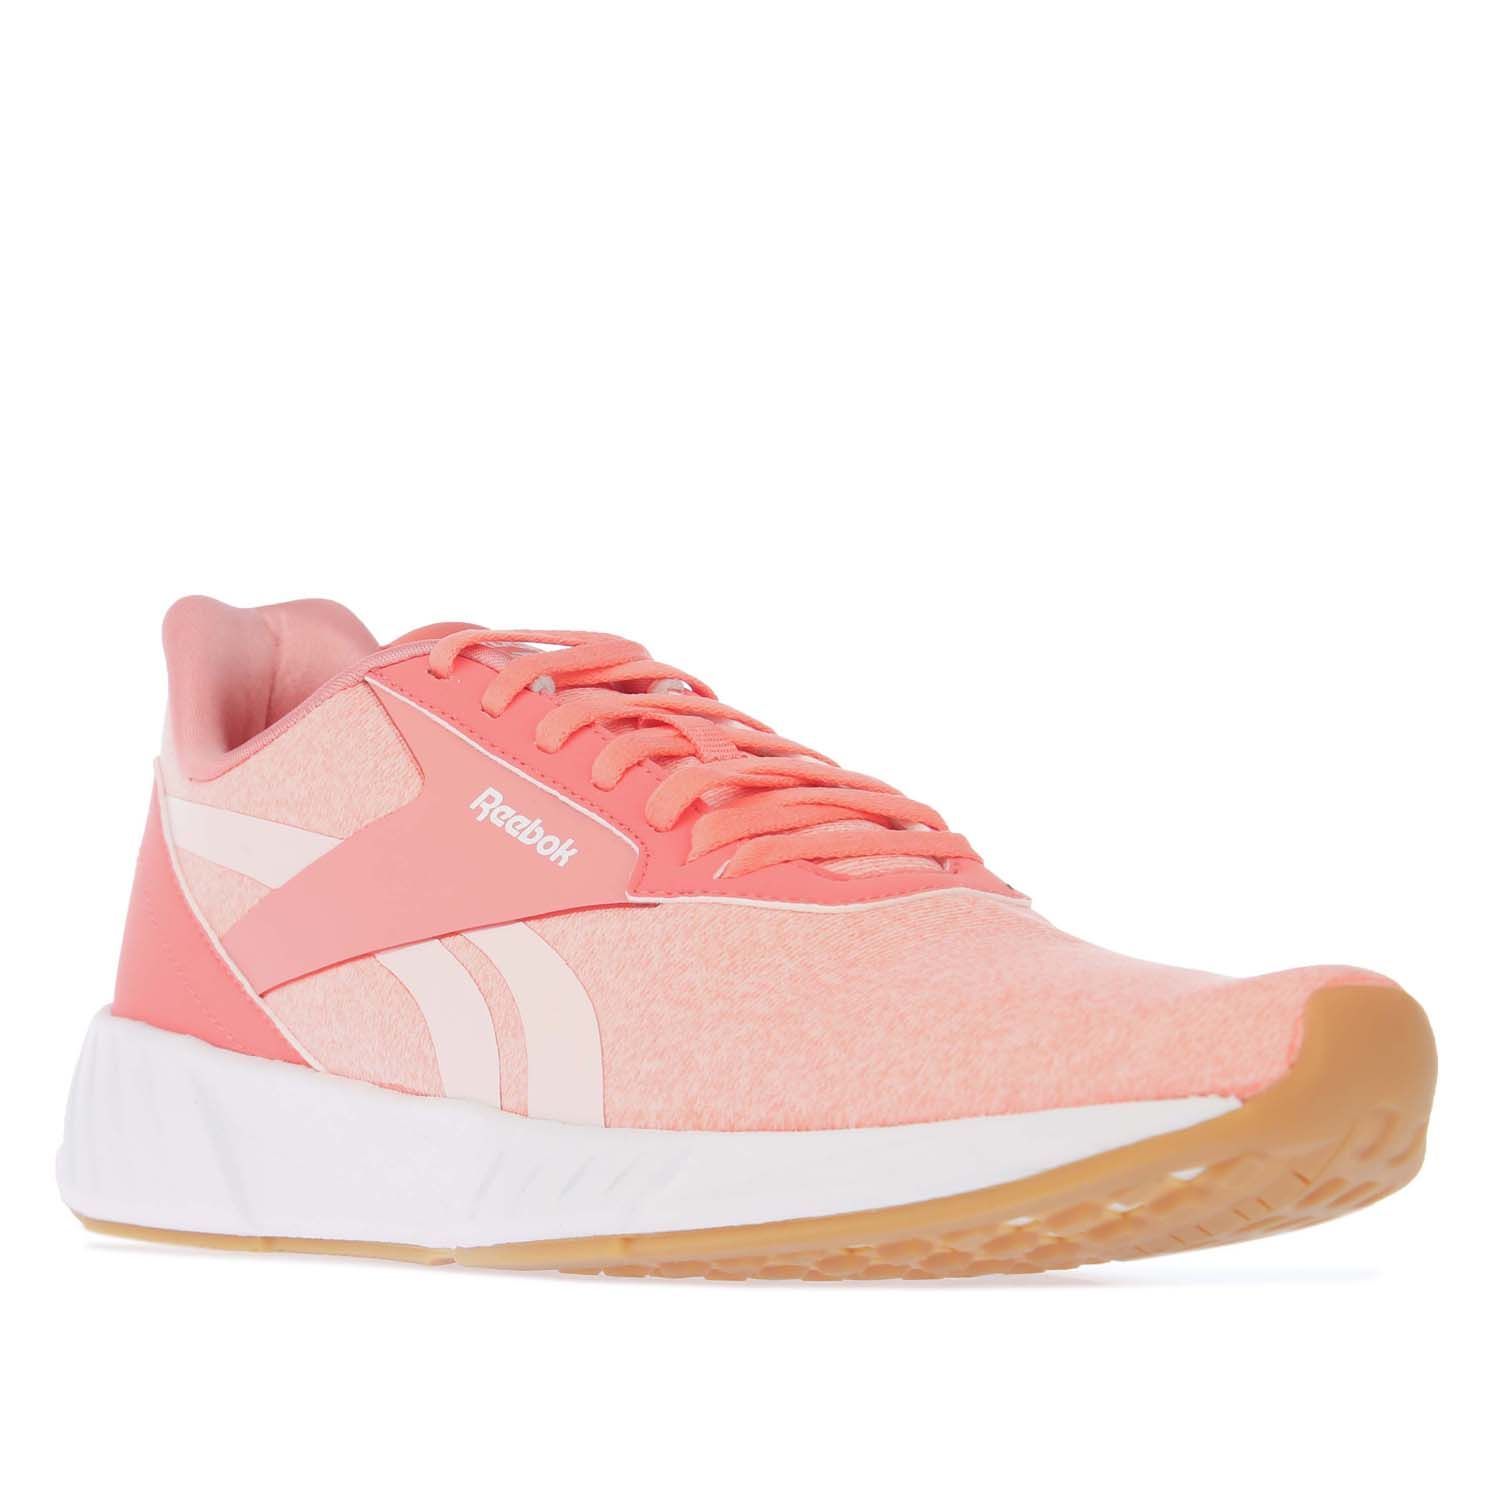 Womens Reebok Lite Plus 2 Running Shoes in coral.- Textile and Synthetic upper.- Lace up fastening.- Soft feel.- EVA midsole for lightweight cushioning.- Responsive FuelFoam midsole.- Durable rubber outsole.- Textile and Synthetic upper  Textile lining  Synthetic sole.- Ref.: FX1717